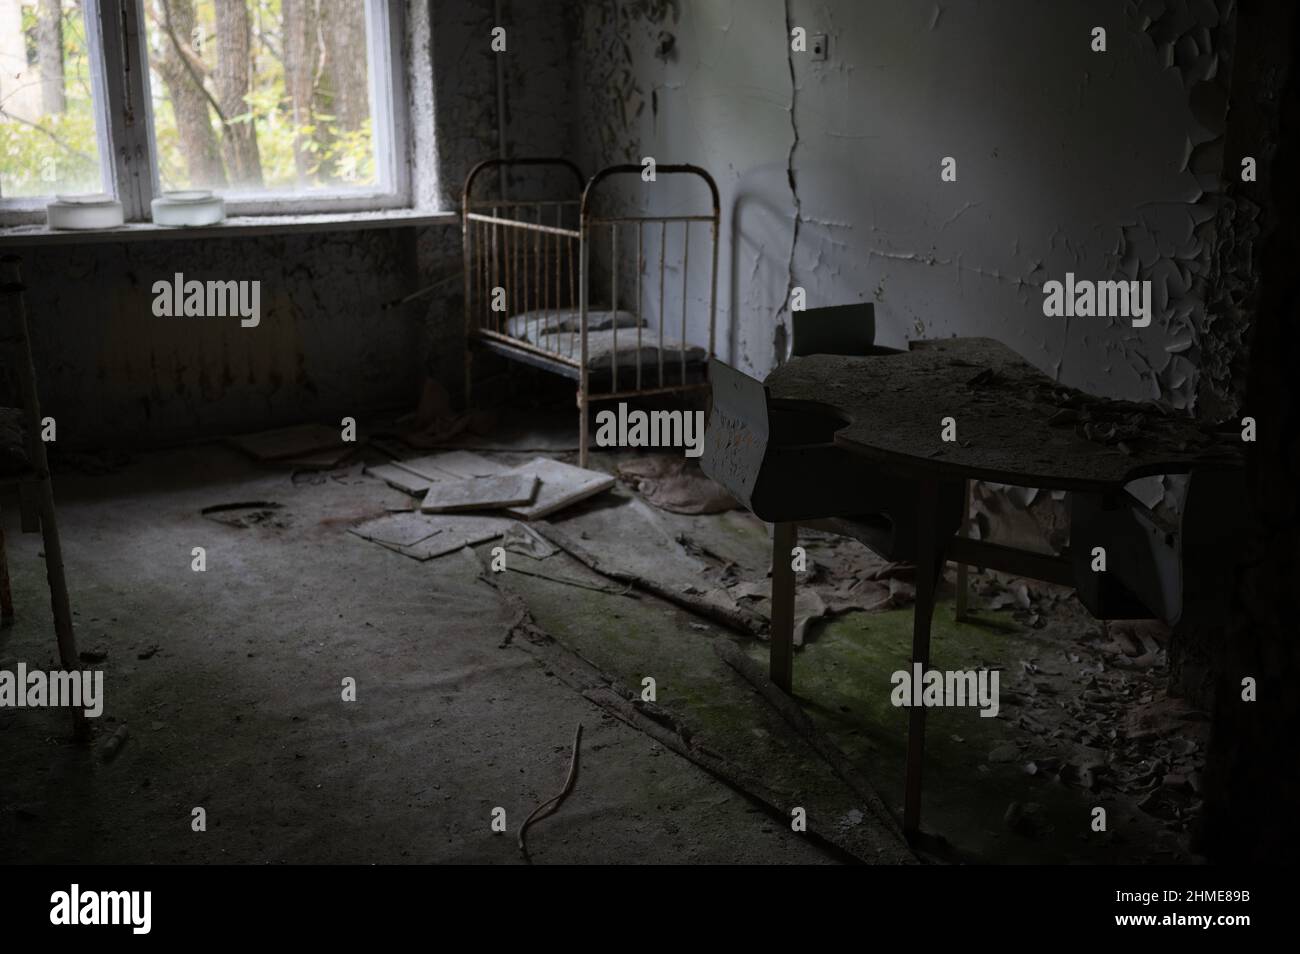 Abandoned beds in a nursery in a decaying hospital in Pripyat, Ukraine near the Chernobyl Nuclear Power Plant. Stock Photo